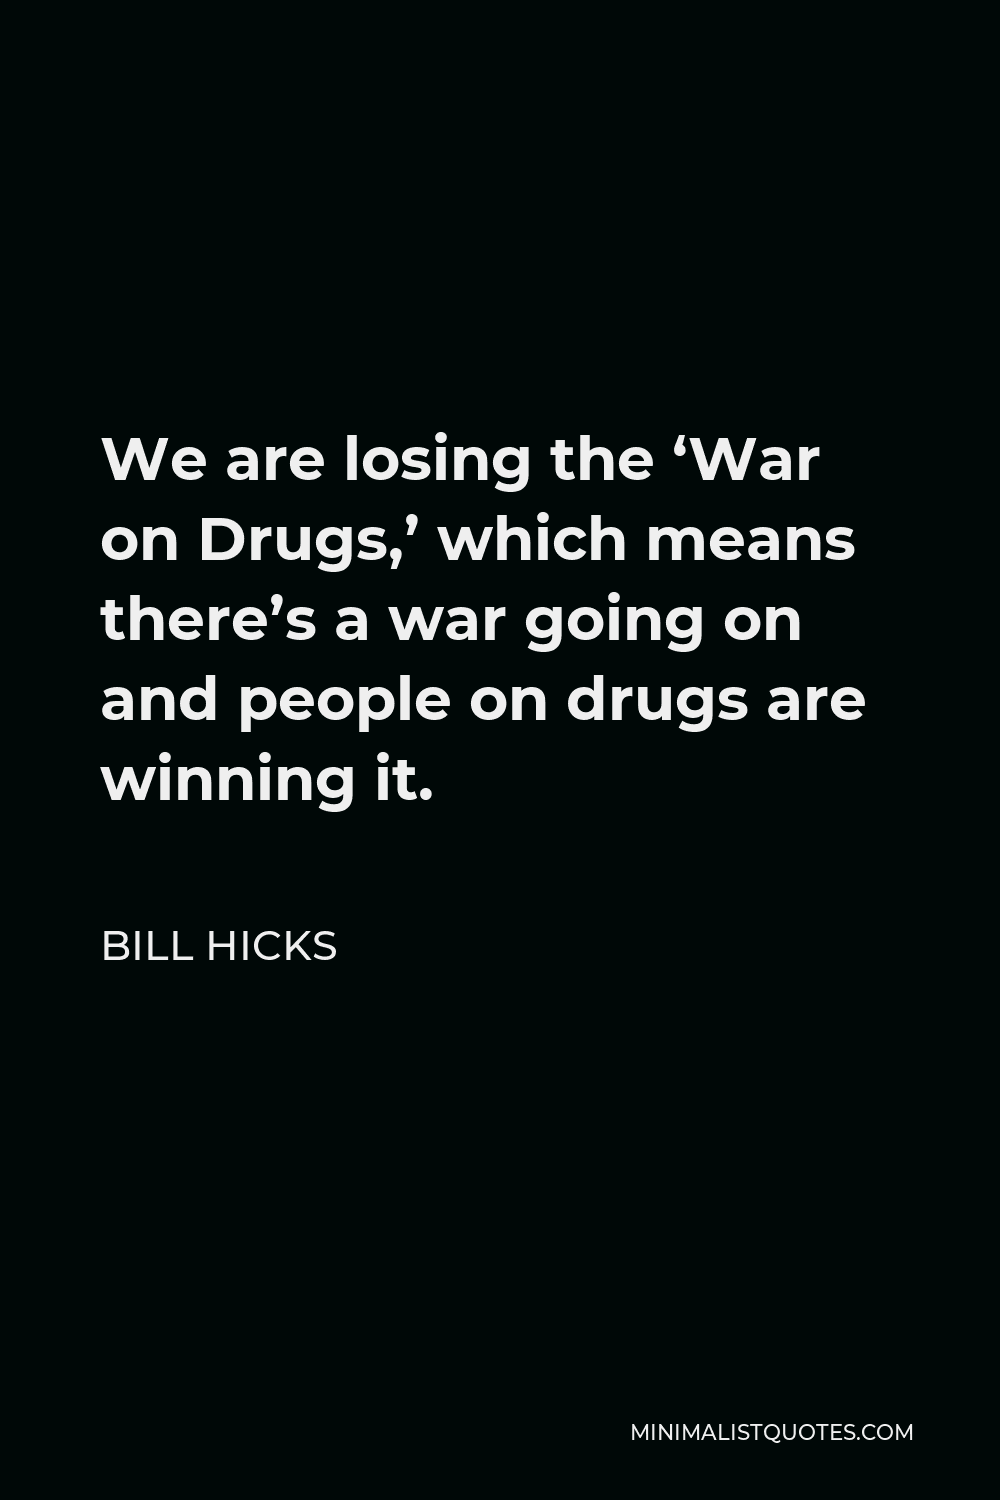 Bill Hicks Quote - We are losing the ‘War on Drugs,’ which means there’s a war going on and people on drugs are winning it.